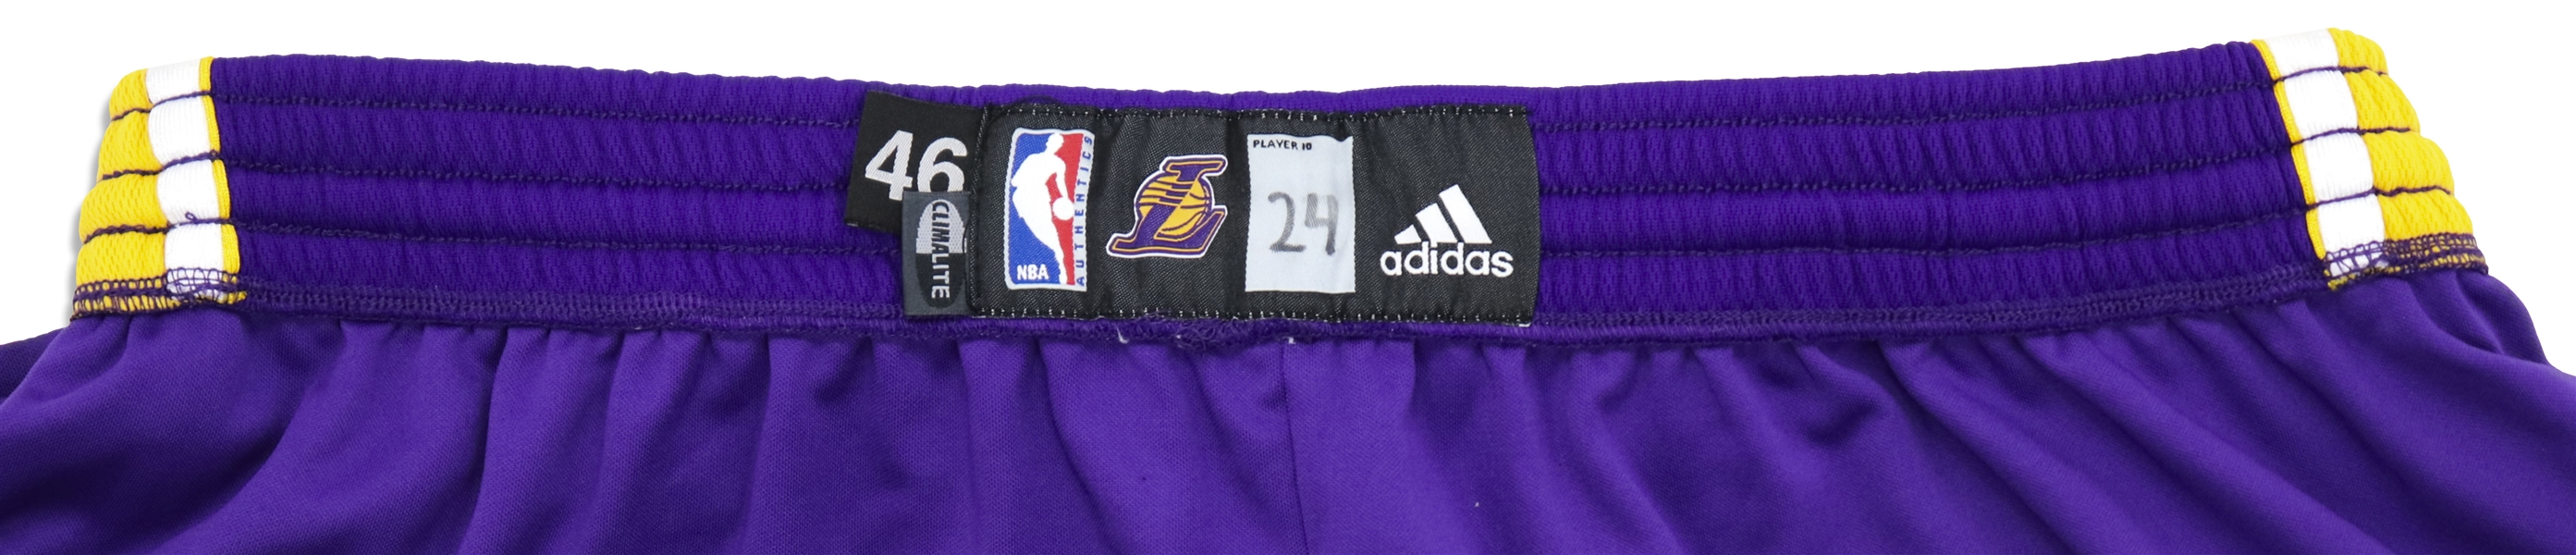 Kobe Bryant Game-Worn Lakers Road Shorts with Team Letter COA